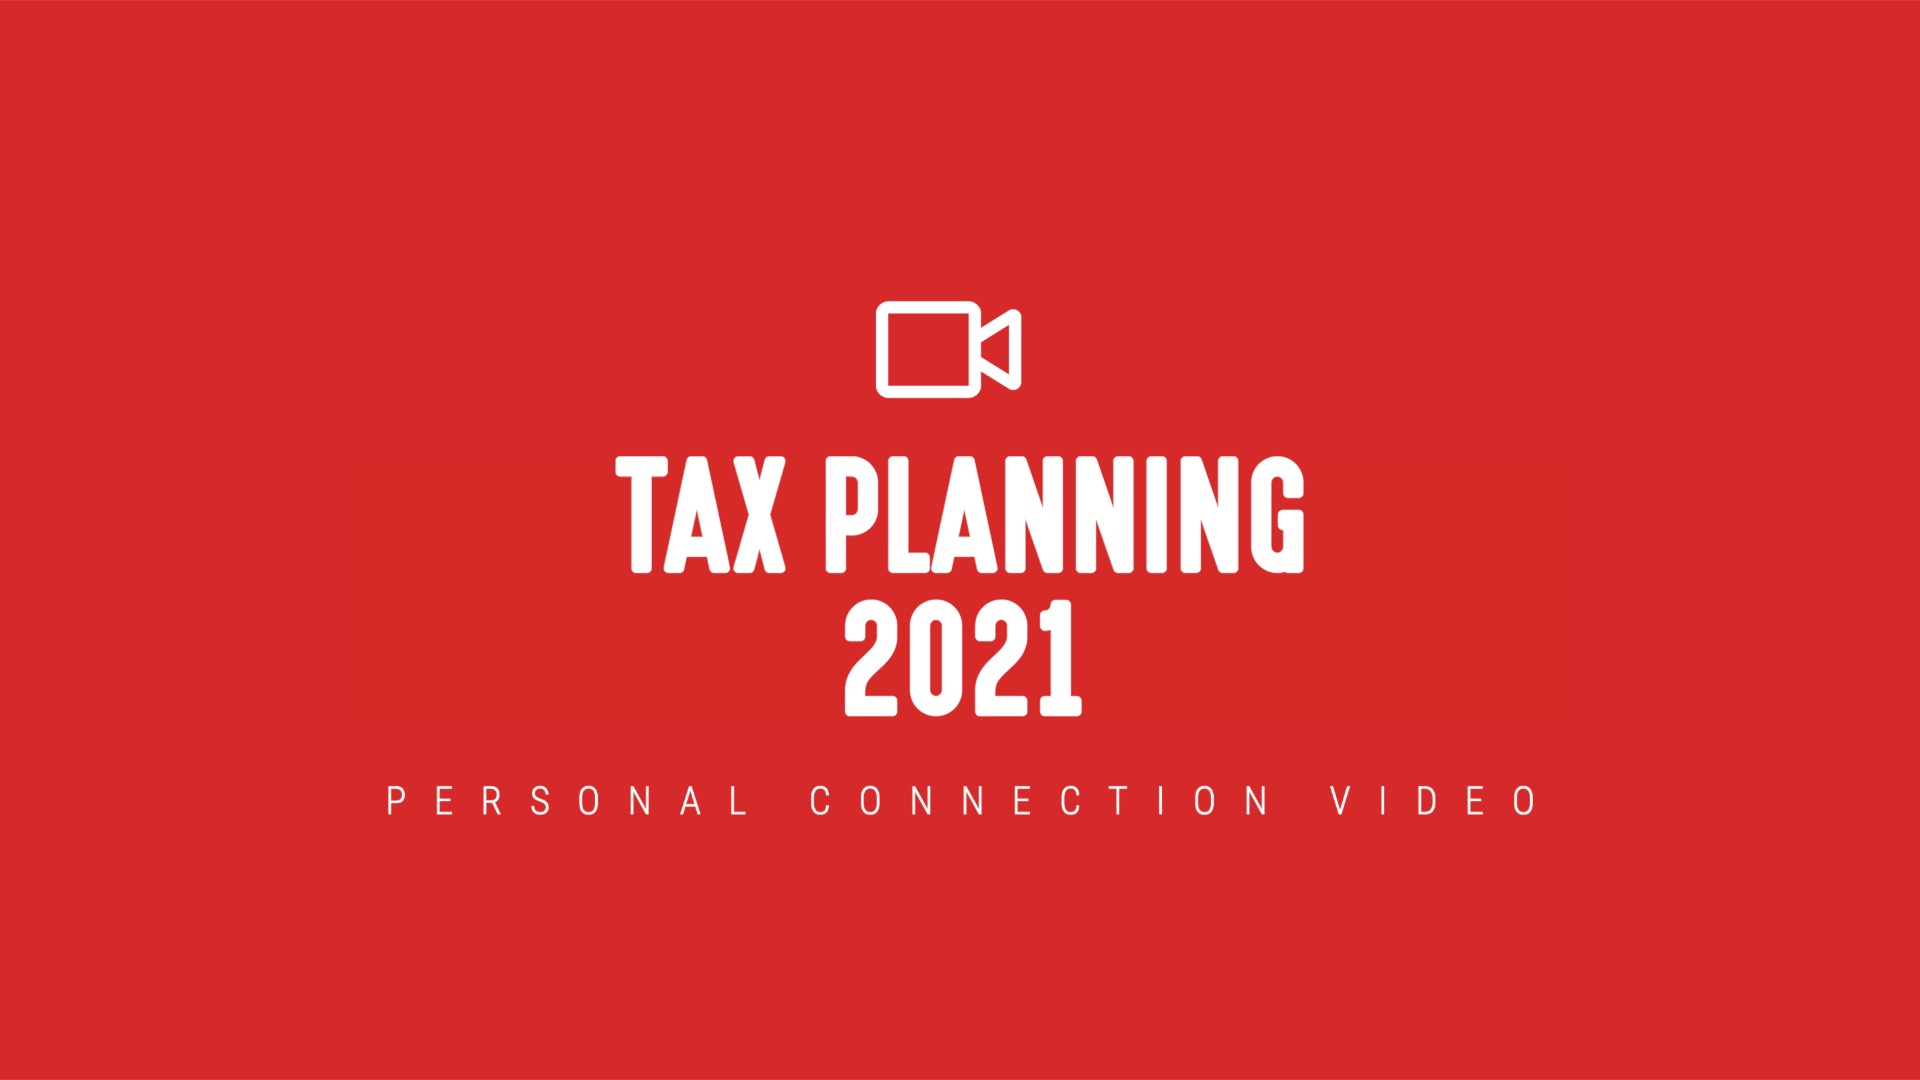 [NEW] Personal Connection Video | Tax Planning in 2021